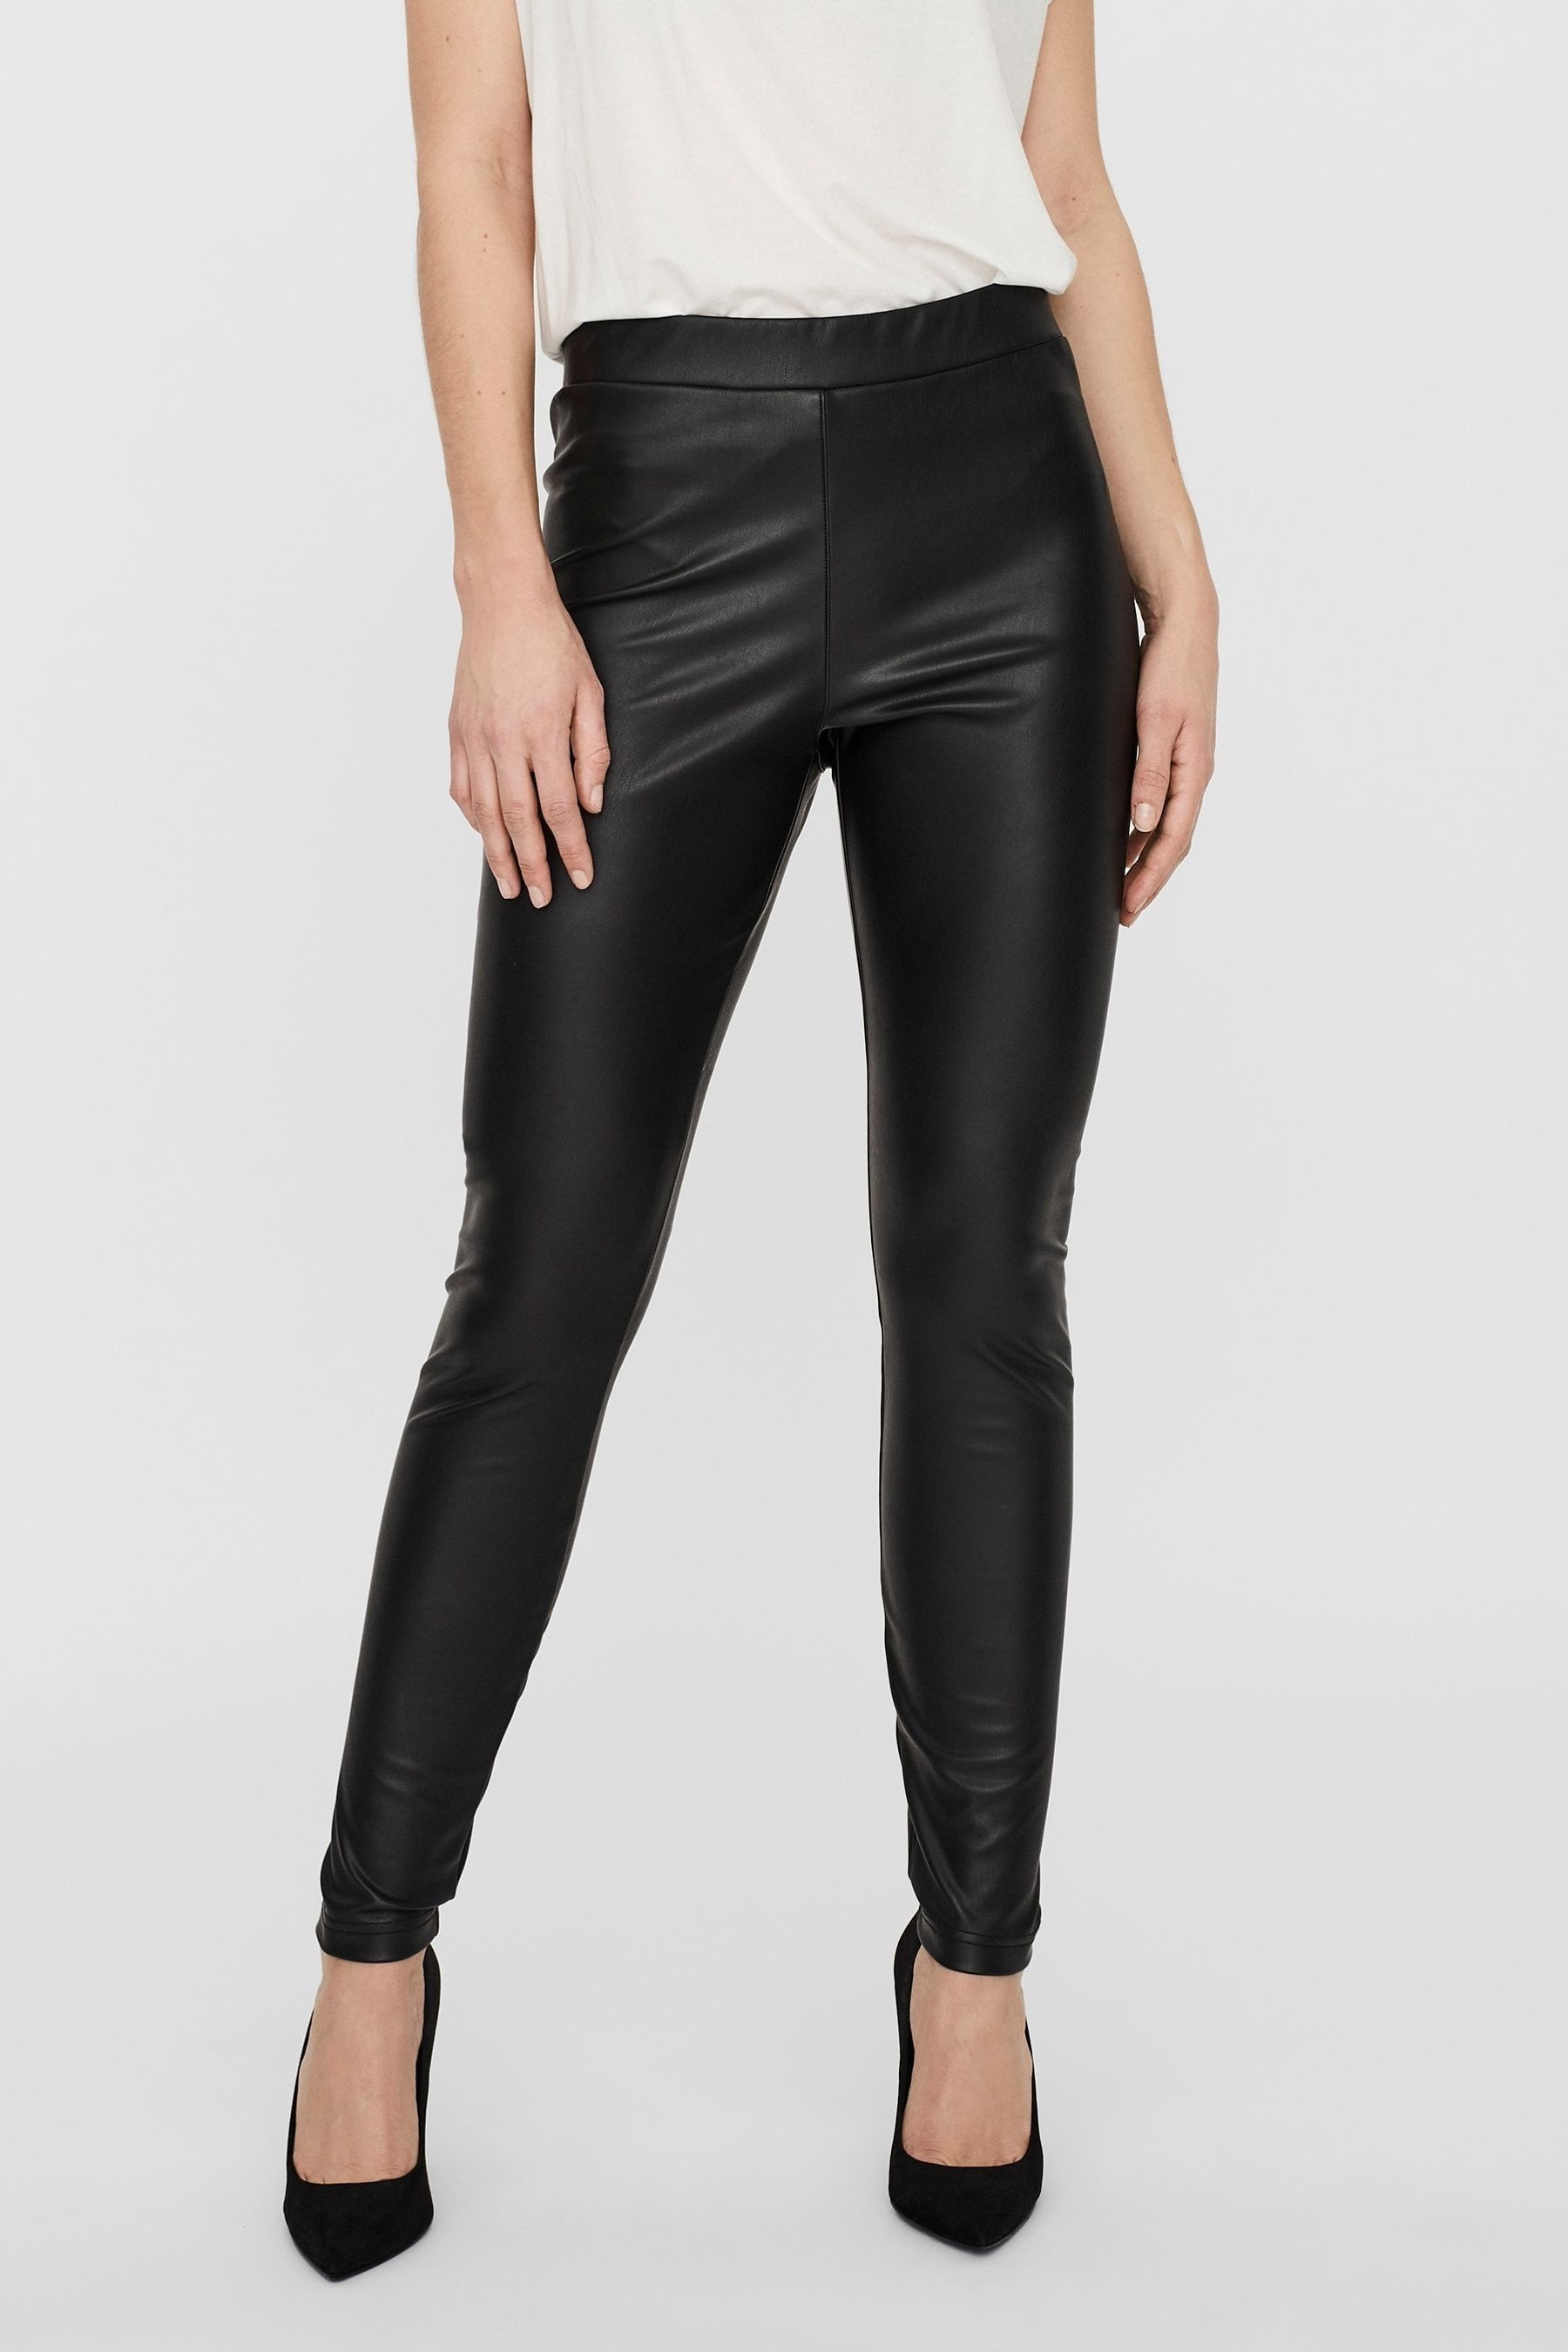 Buy Vero Moda Faux Leather Trousers from the Next UK online shop